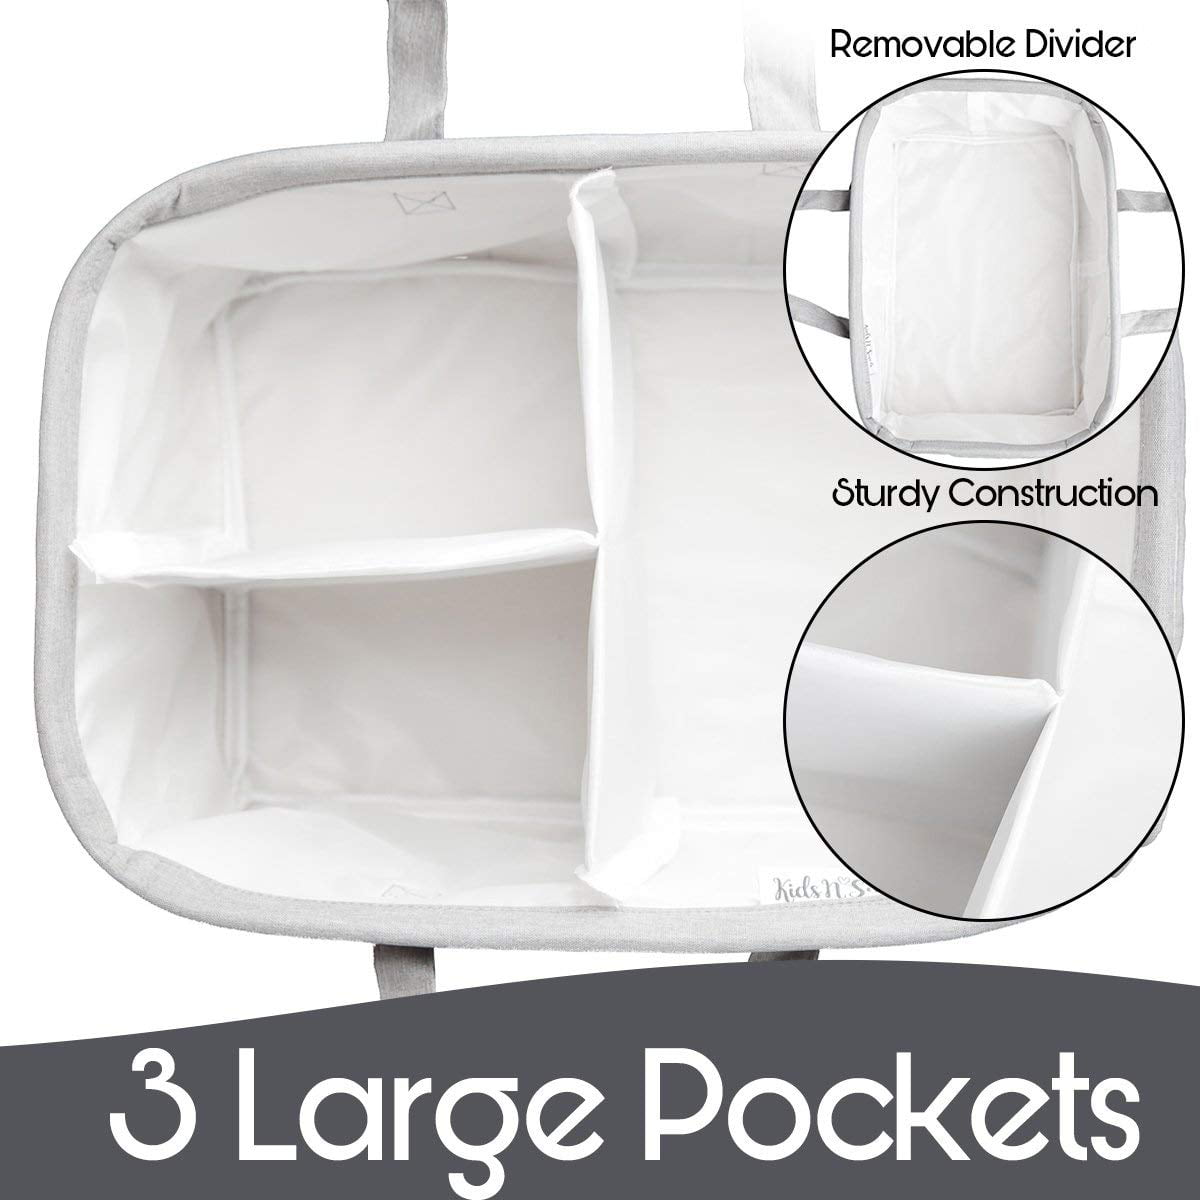 Baby Shower Gift Zipper Pocket Baby Diaper Caddy Organizer by Kids N Such Large 15x12x7 Portable Diaper Holder Basket for Nursery or Car Boy or Girl 3 Insert Compartments Grey Canvas Tote 